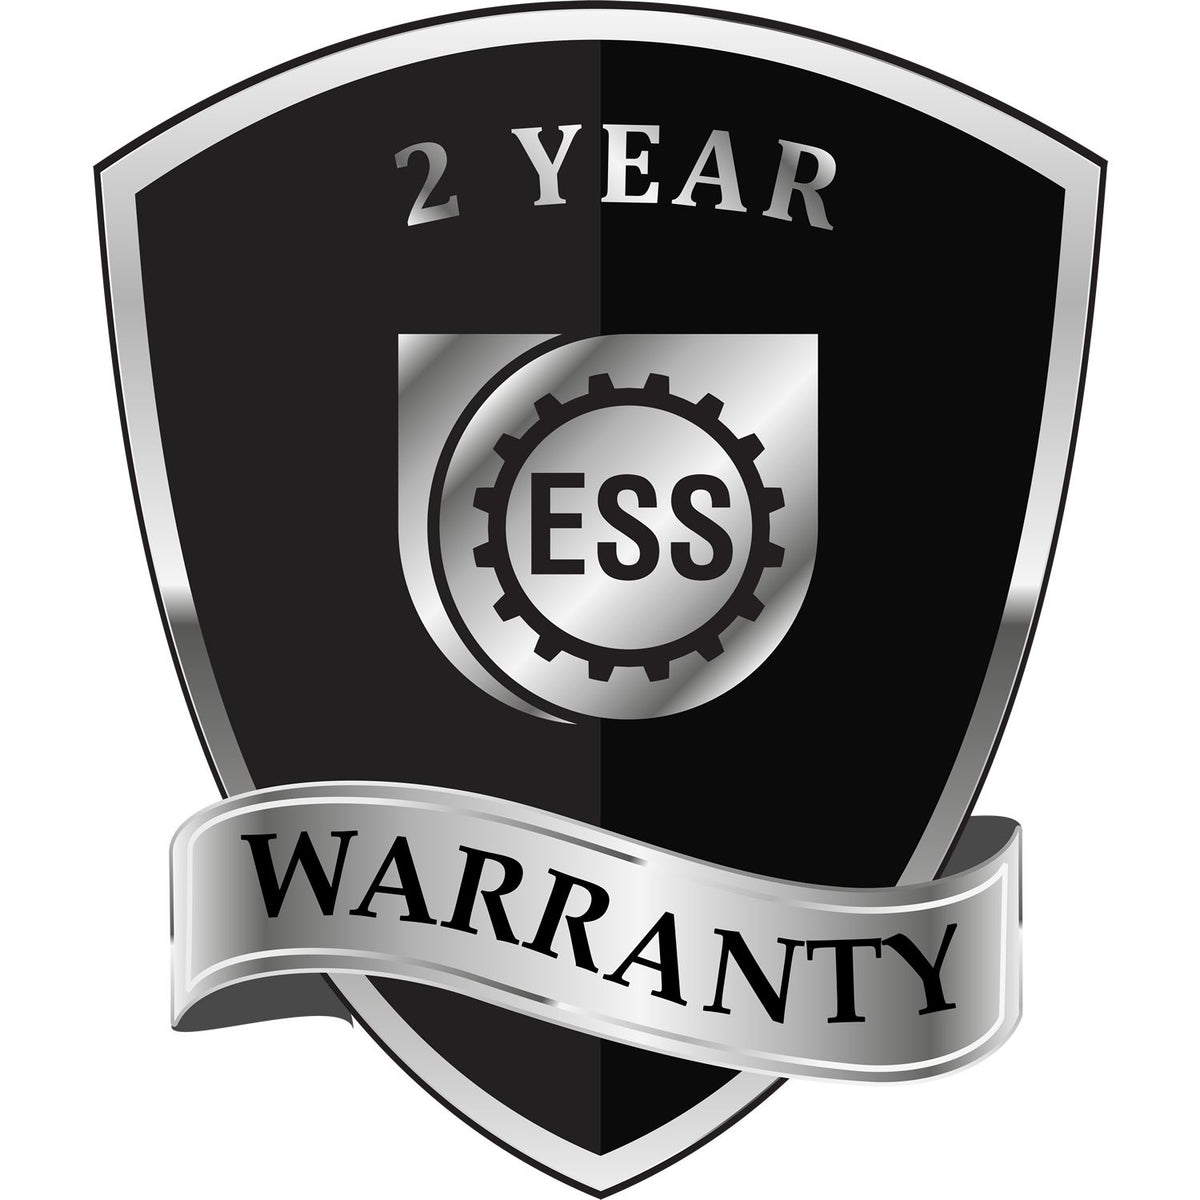 A black and silver badge or emblem showing warranty information for the State of New Jersey Extended Long Reach Geologist Seal